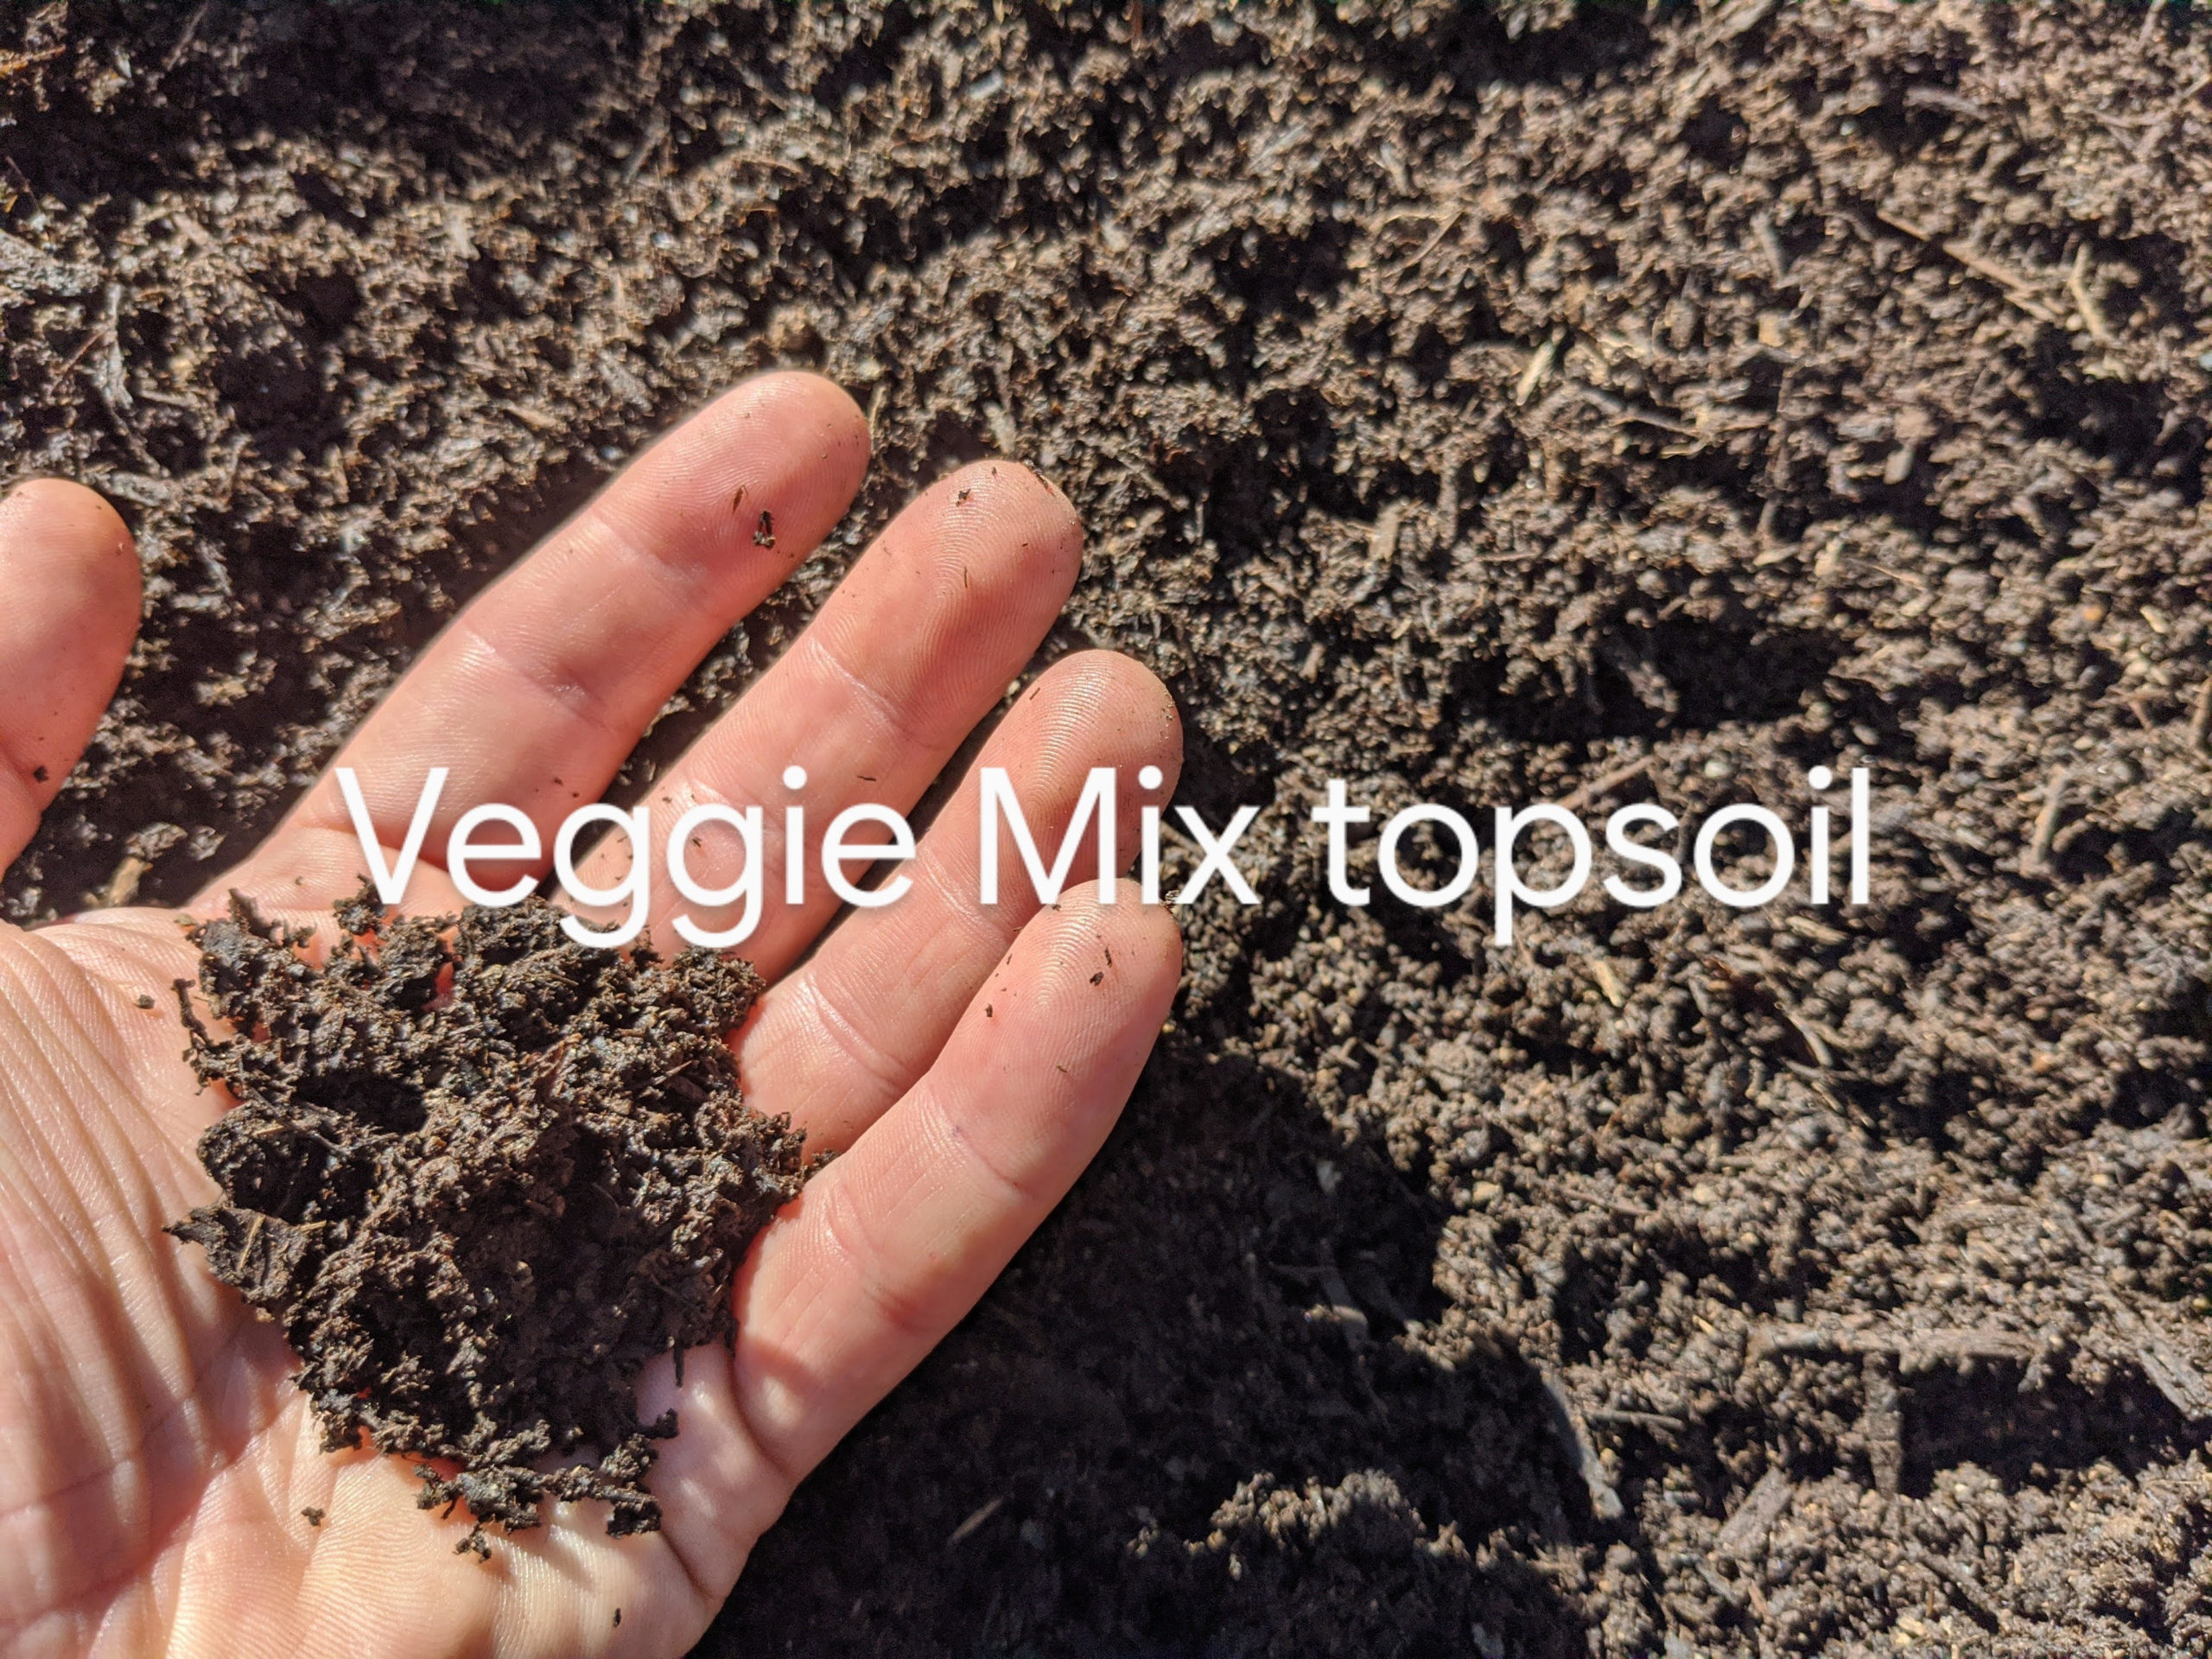 Veggie Mix Organic Soil with home delivery in White Rock